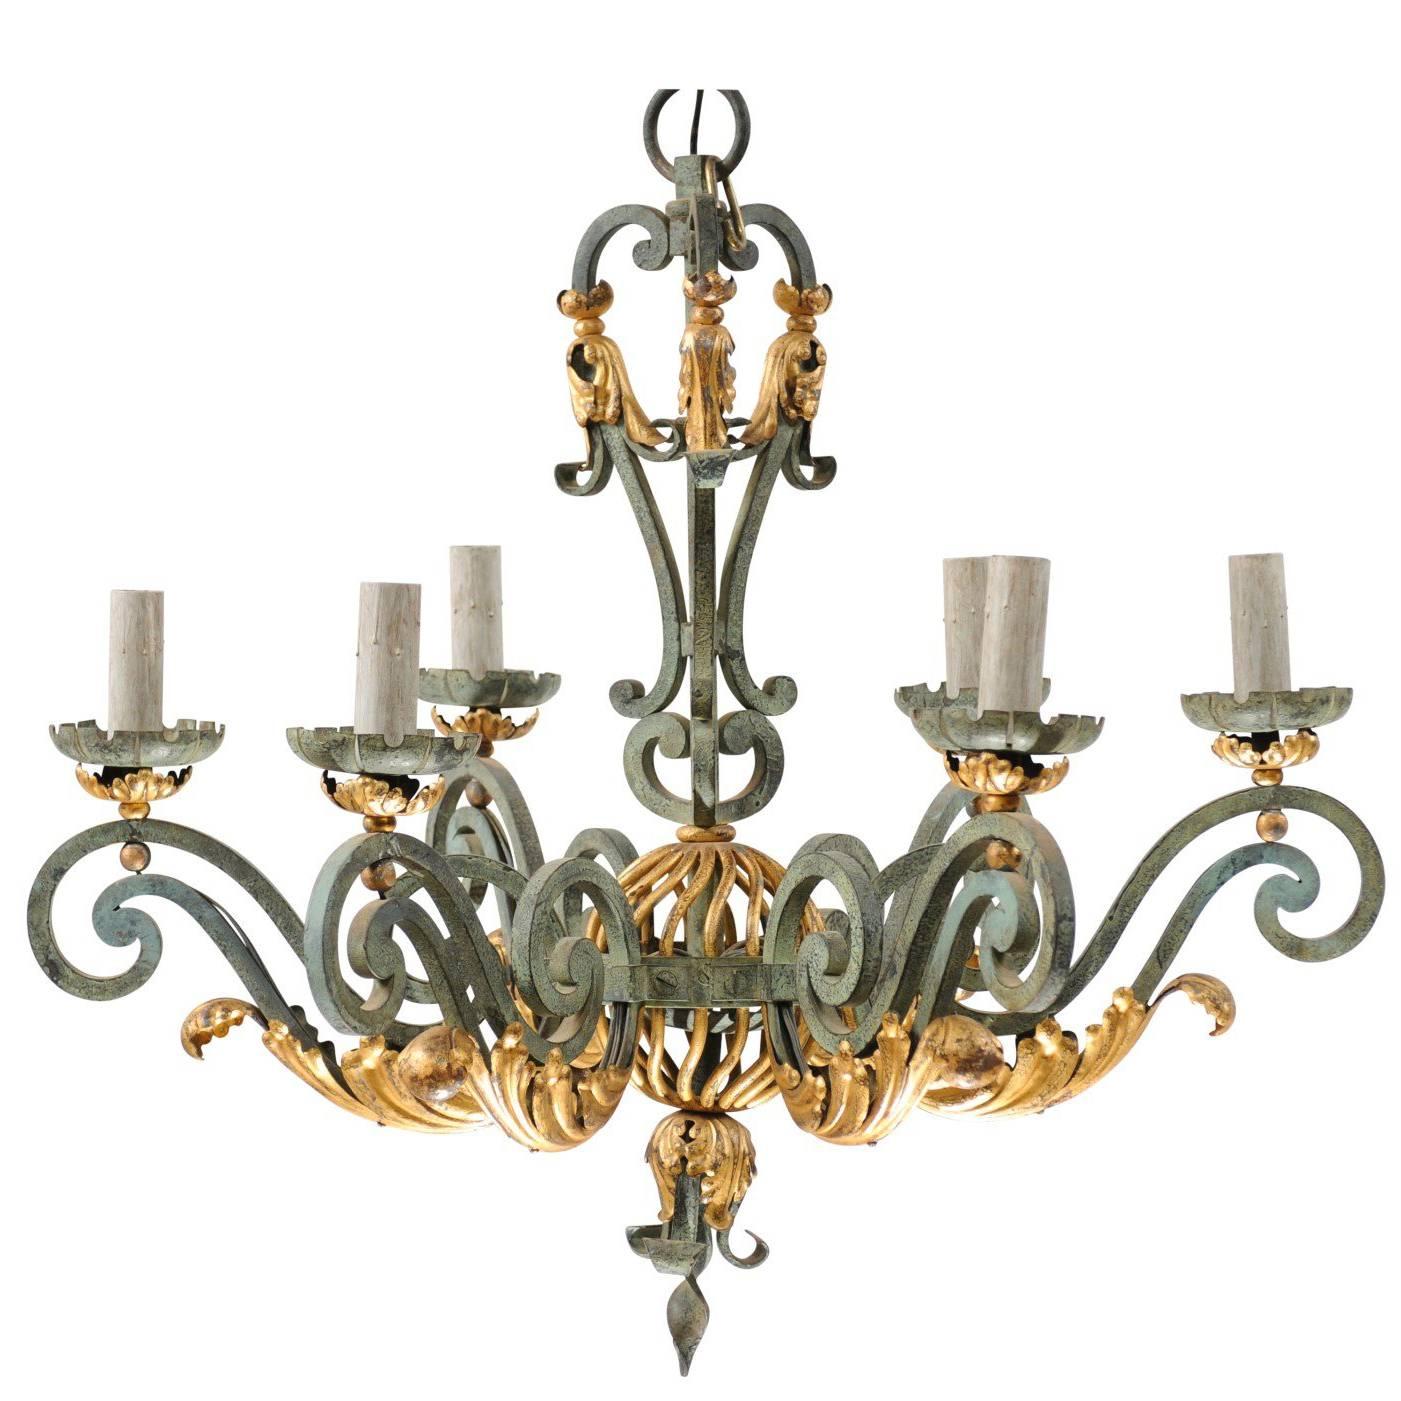 Elegant French Verdigris Six-Light Chandelier of Forged Iron with Gilt Accent